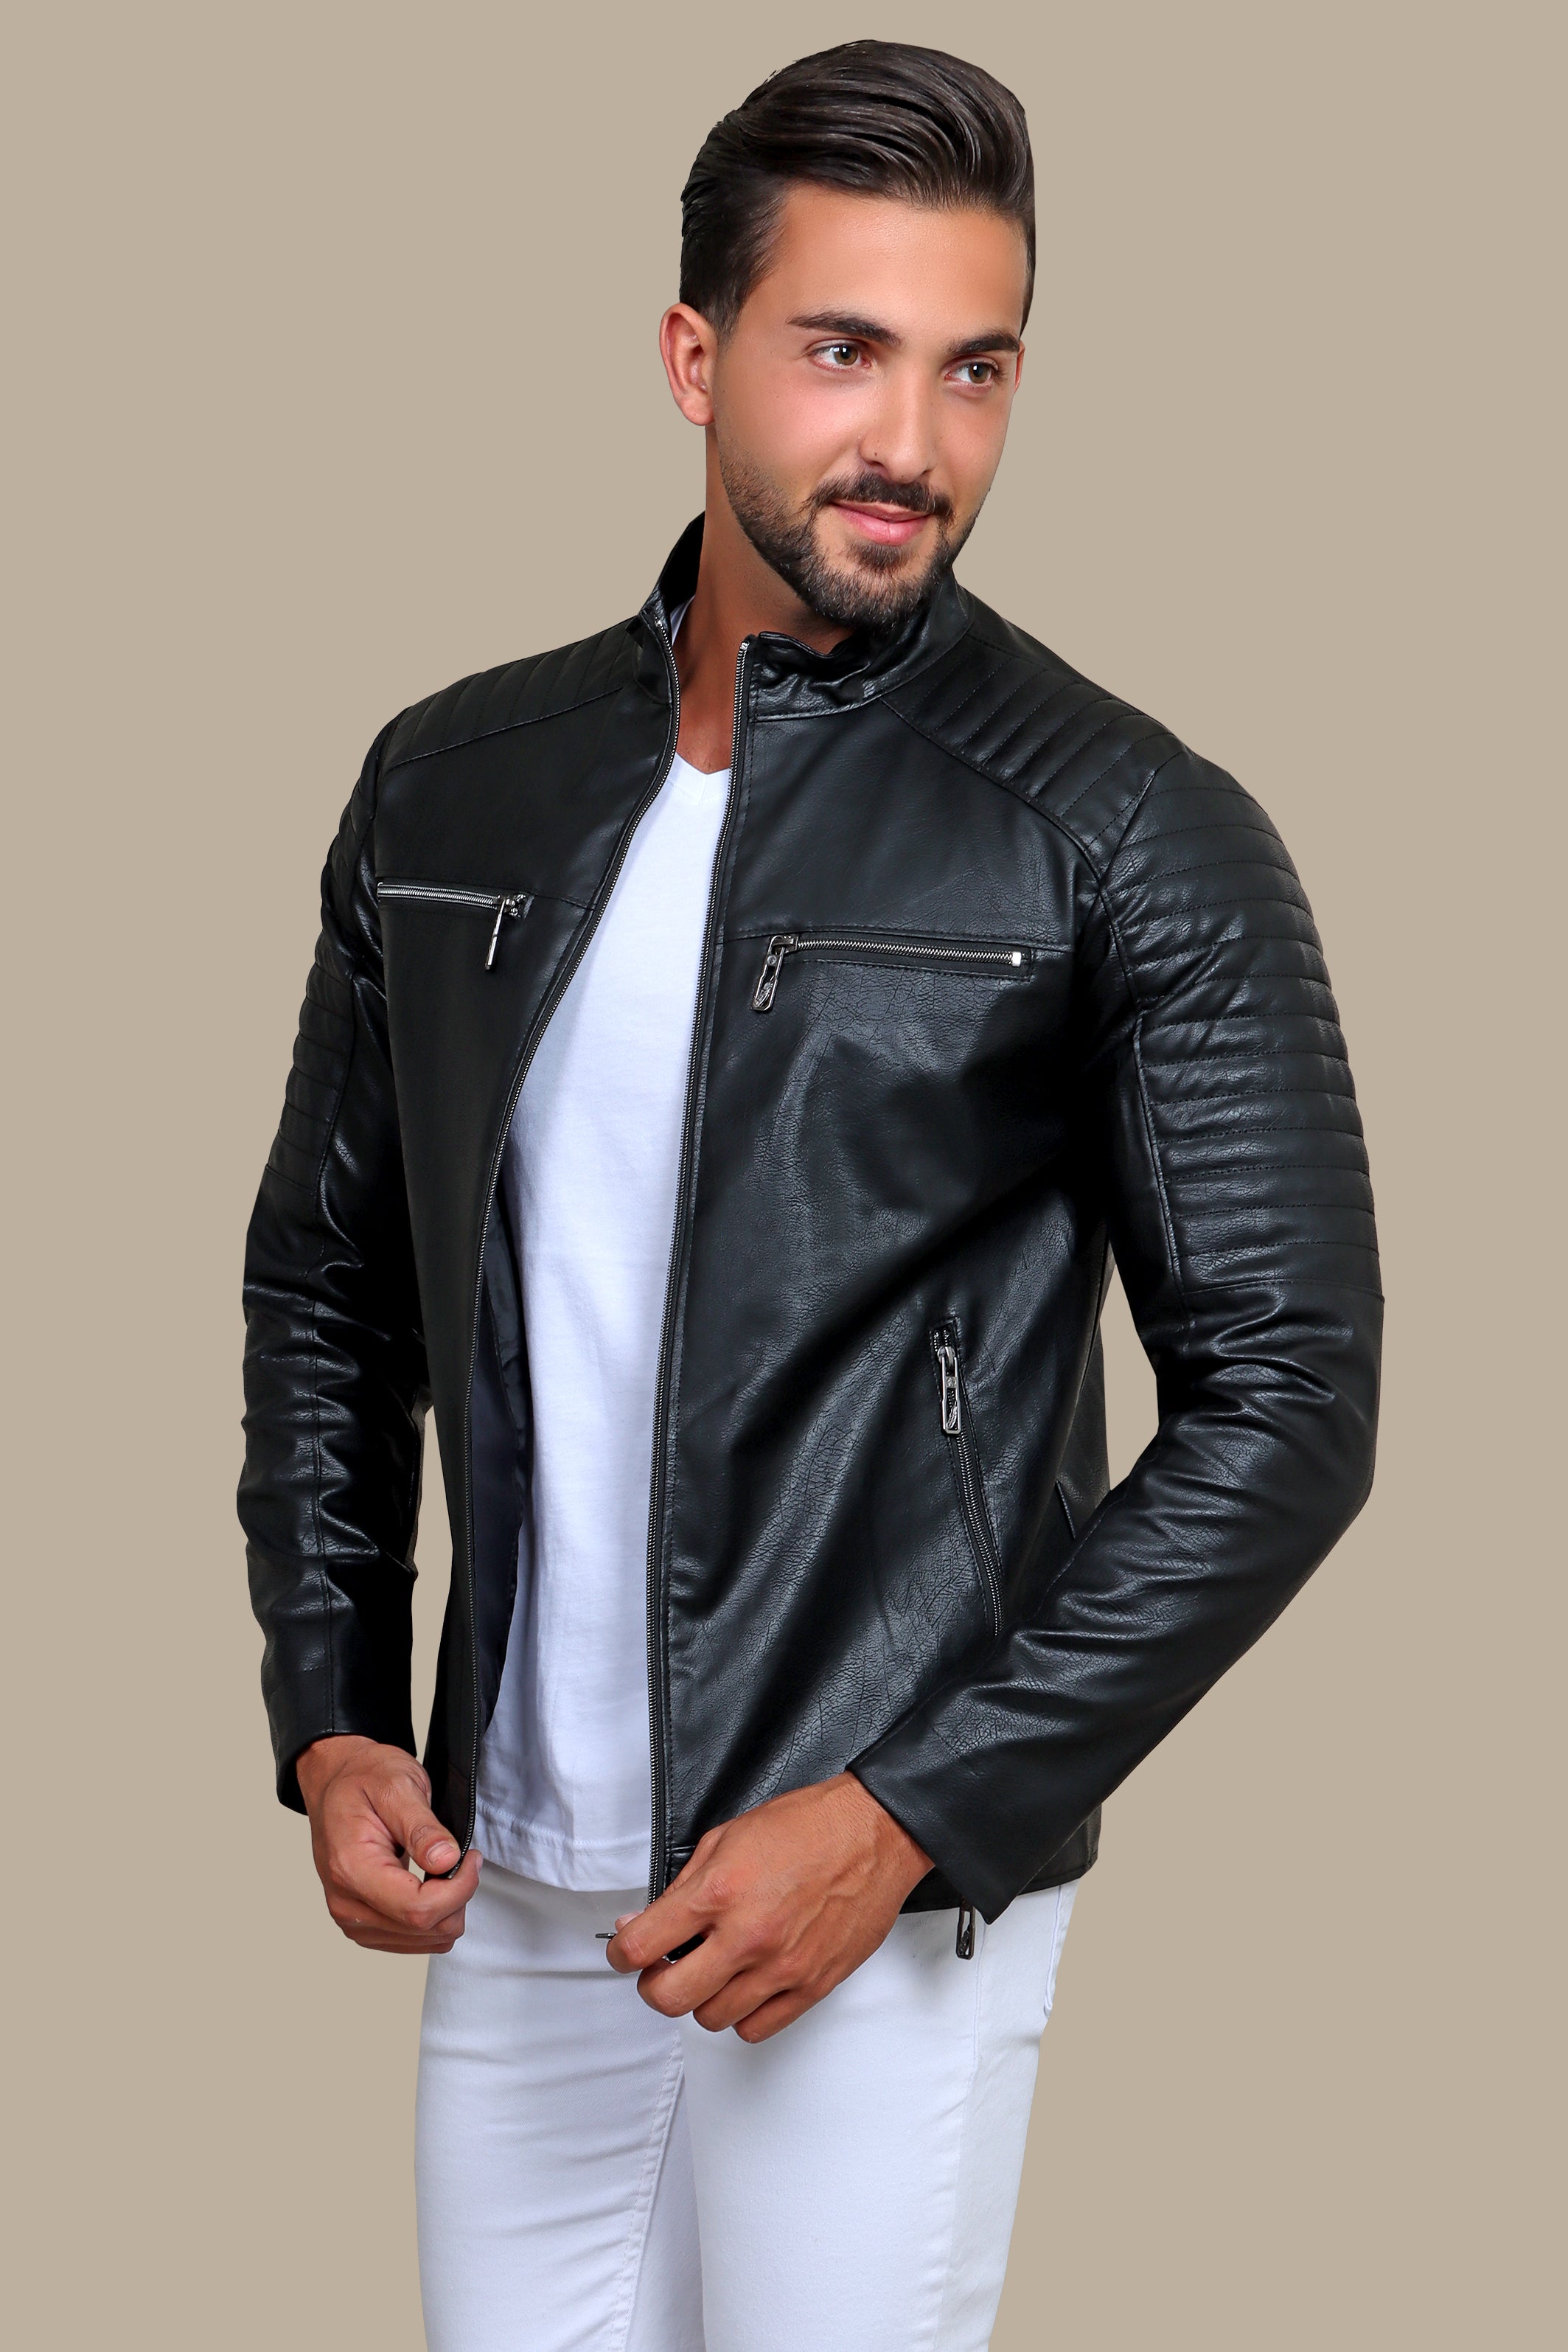 Rugged Elegance: Black Faux Leather Biker Jacket with Four Zippers